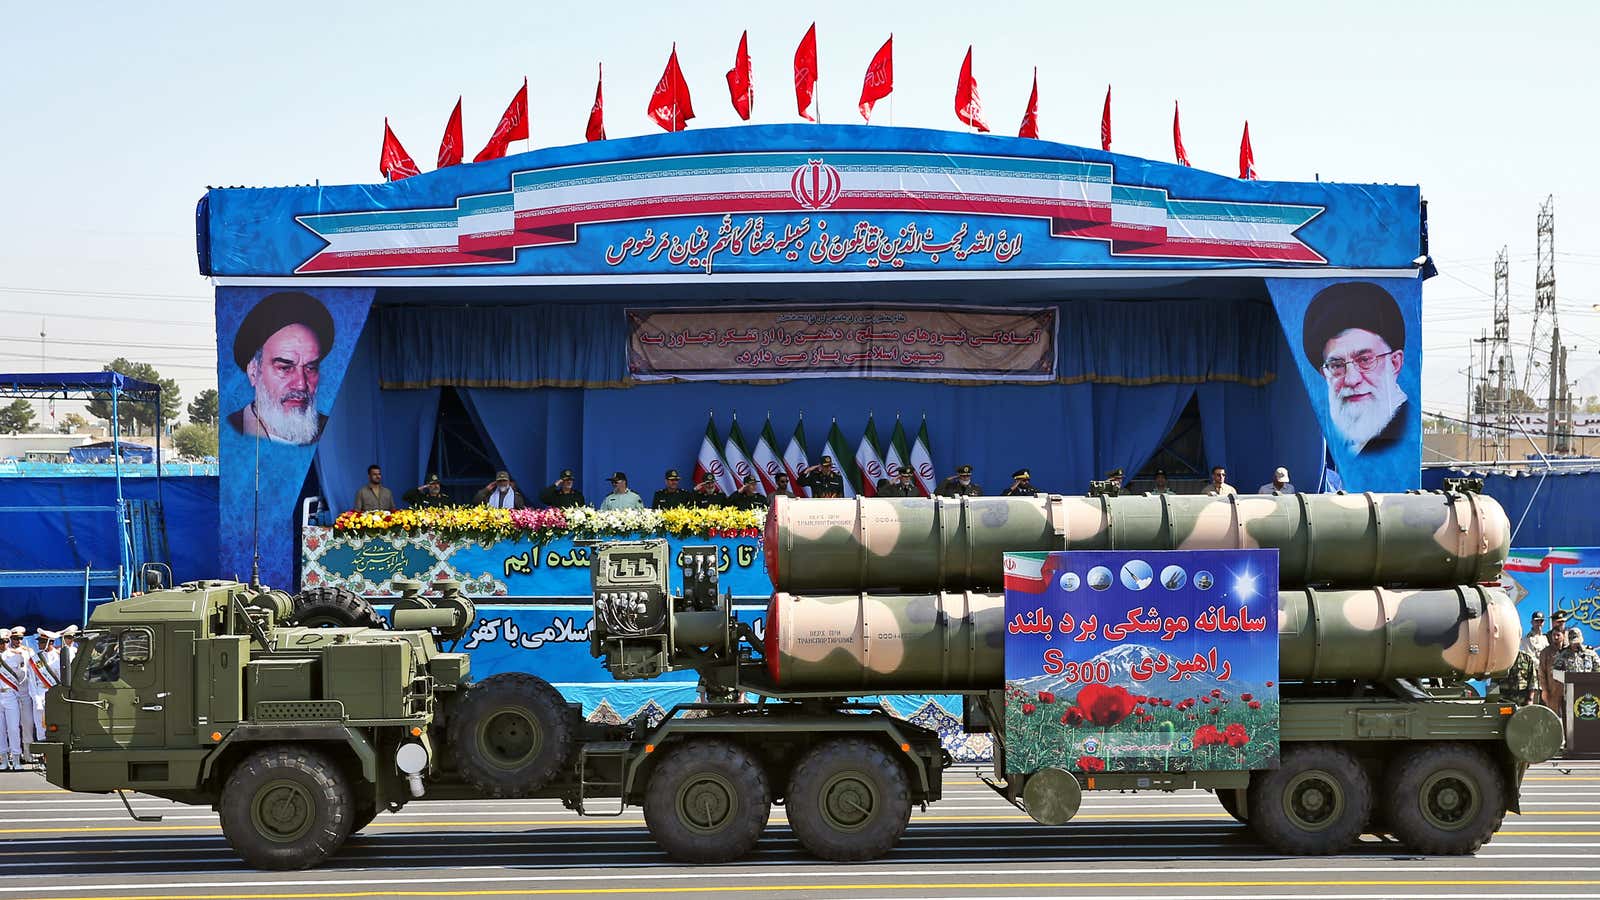 An S-300 air defense missile system on parade in Tehran in 2016.